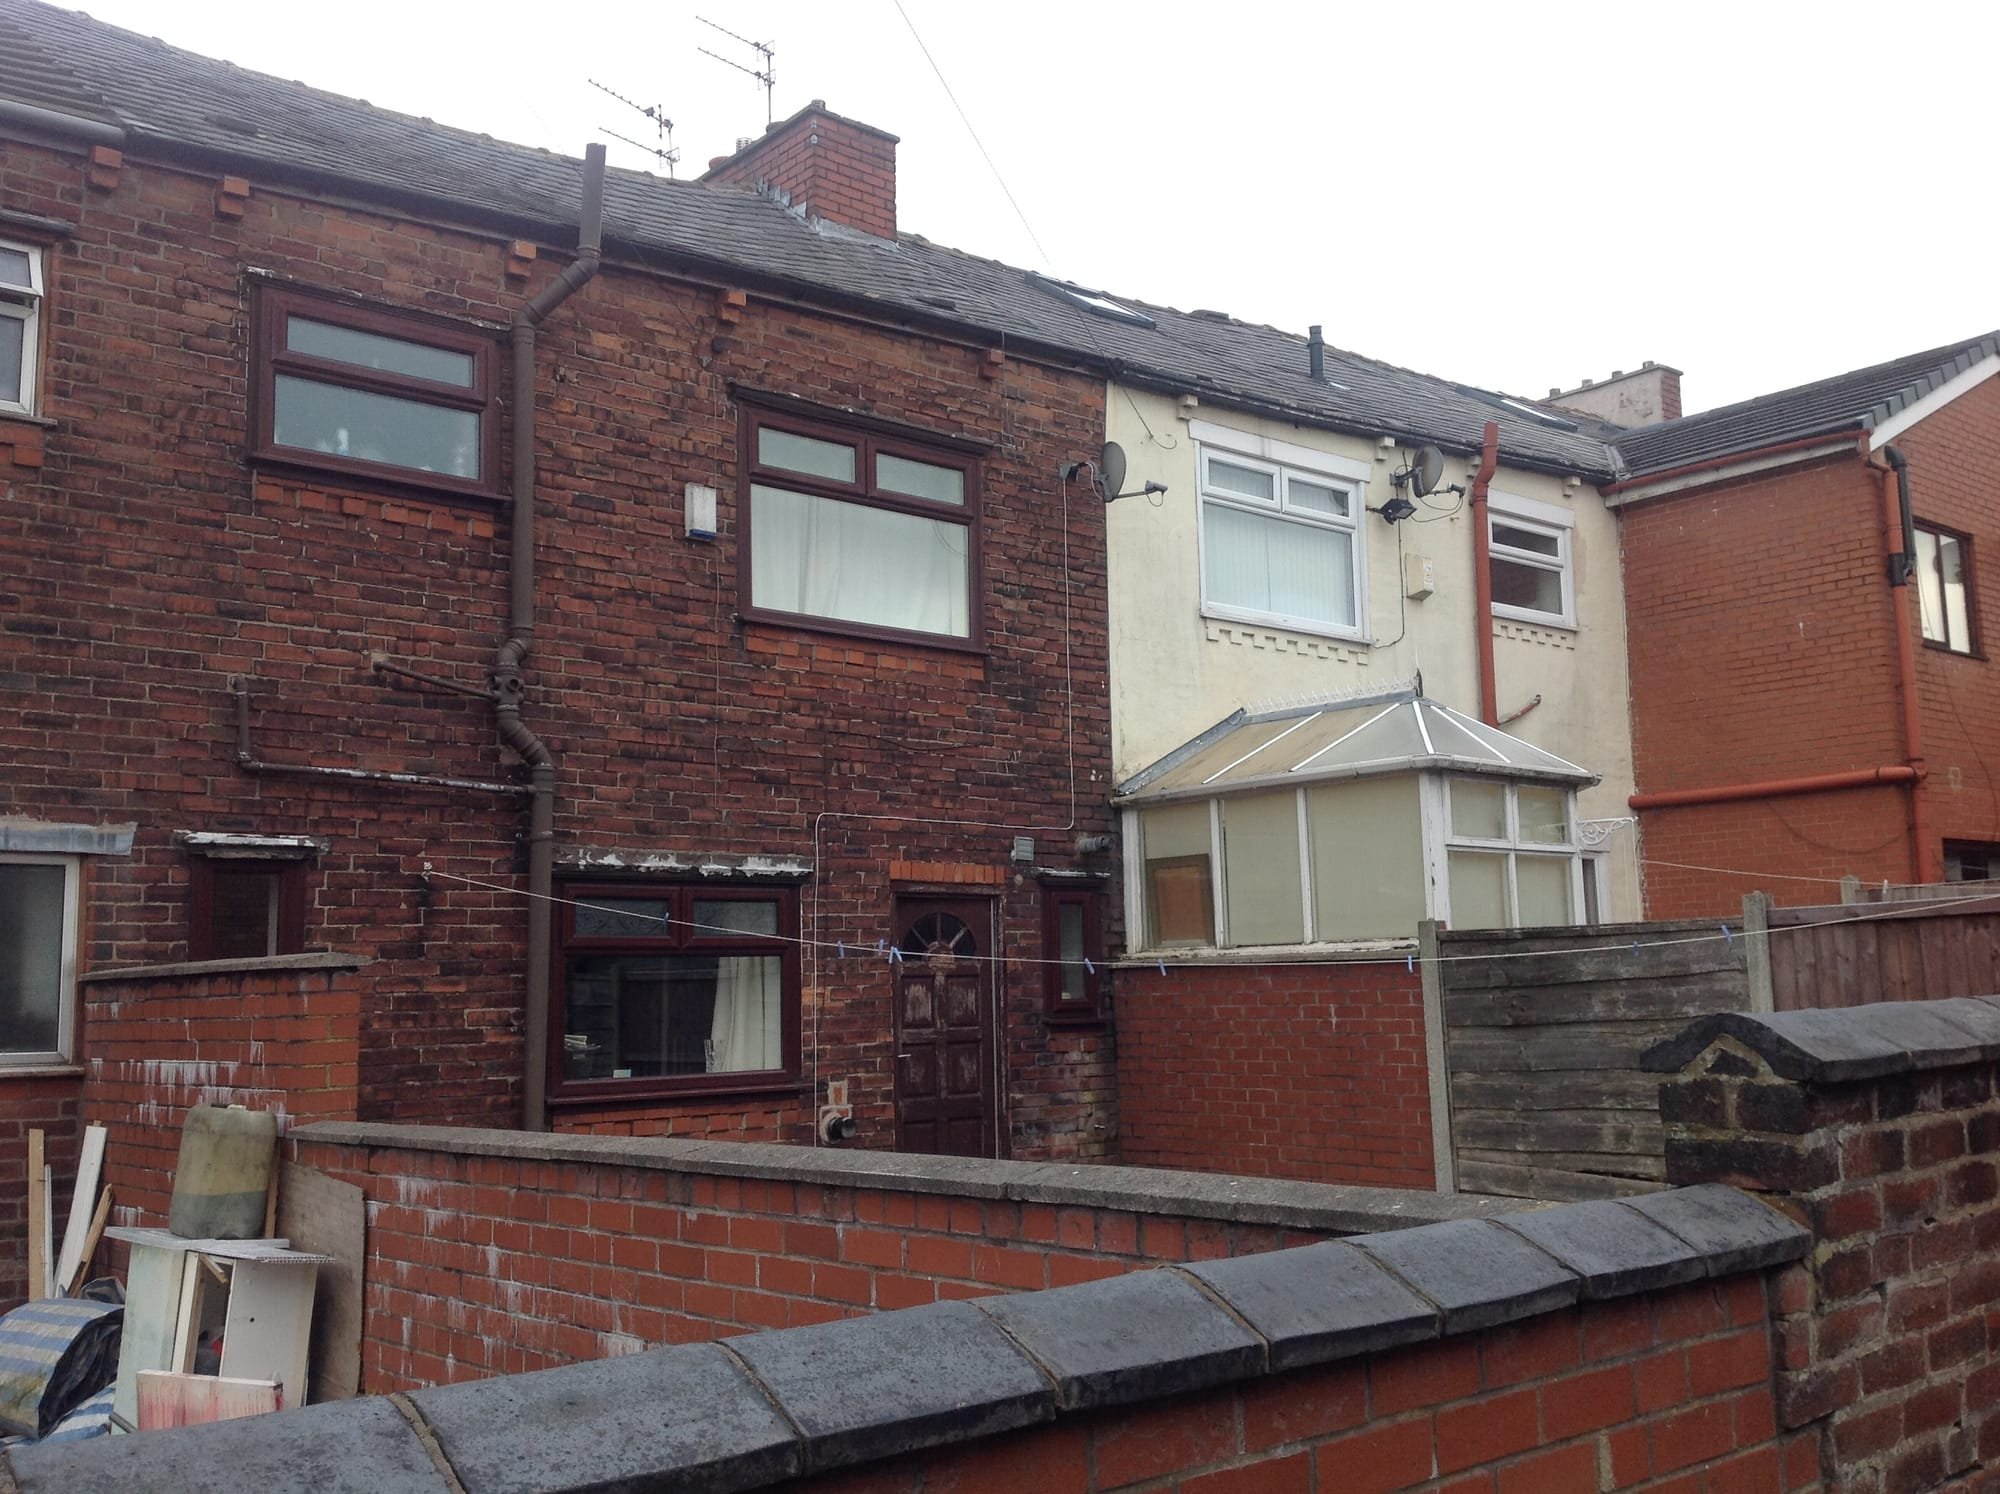 Case Study 5 - Thurland Road, Oldham